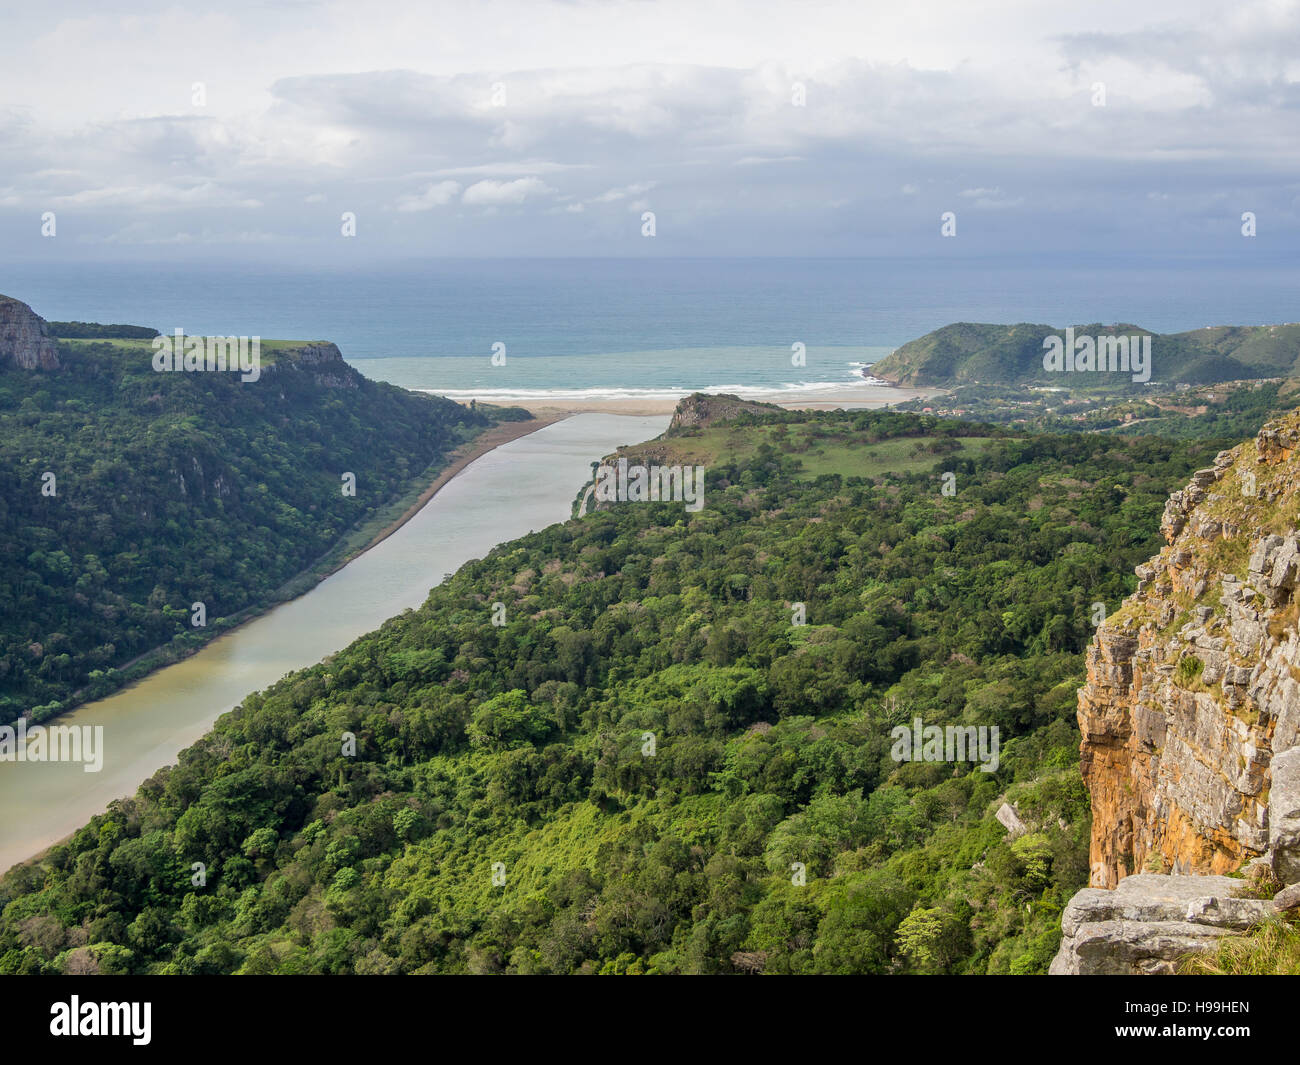 Aerial view of brown river surrounded by forest flowing into ocean at South Africa's Wild Coast. Dramatic sky and beach in background. Stock Photo